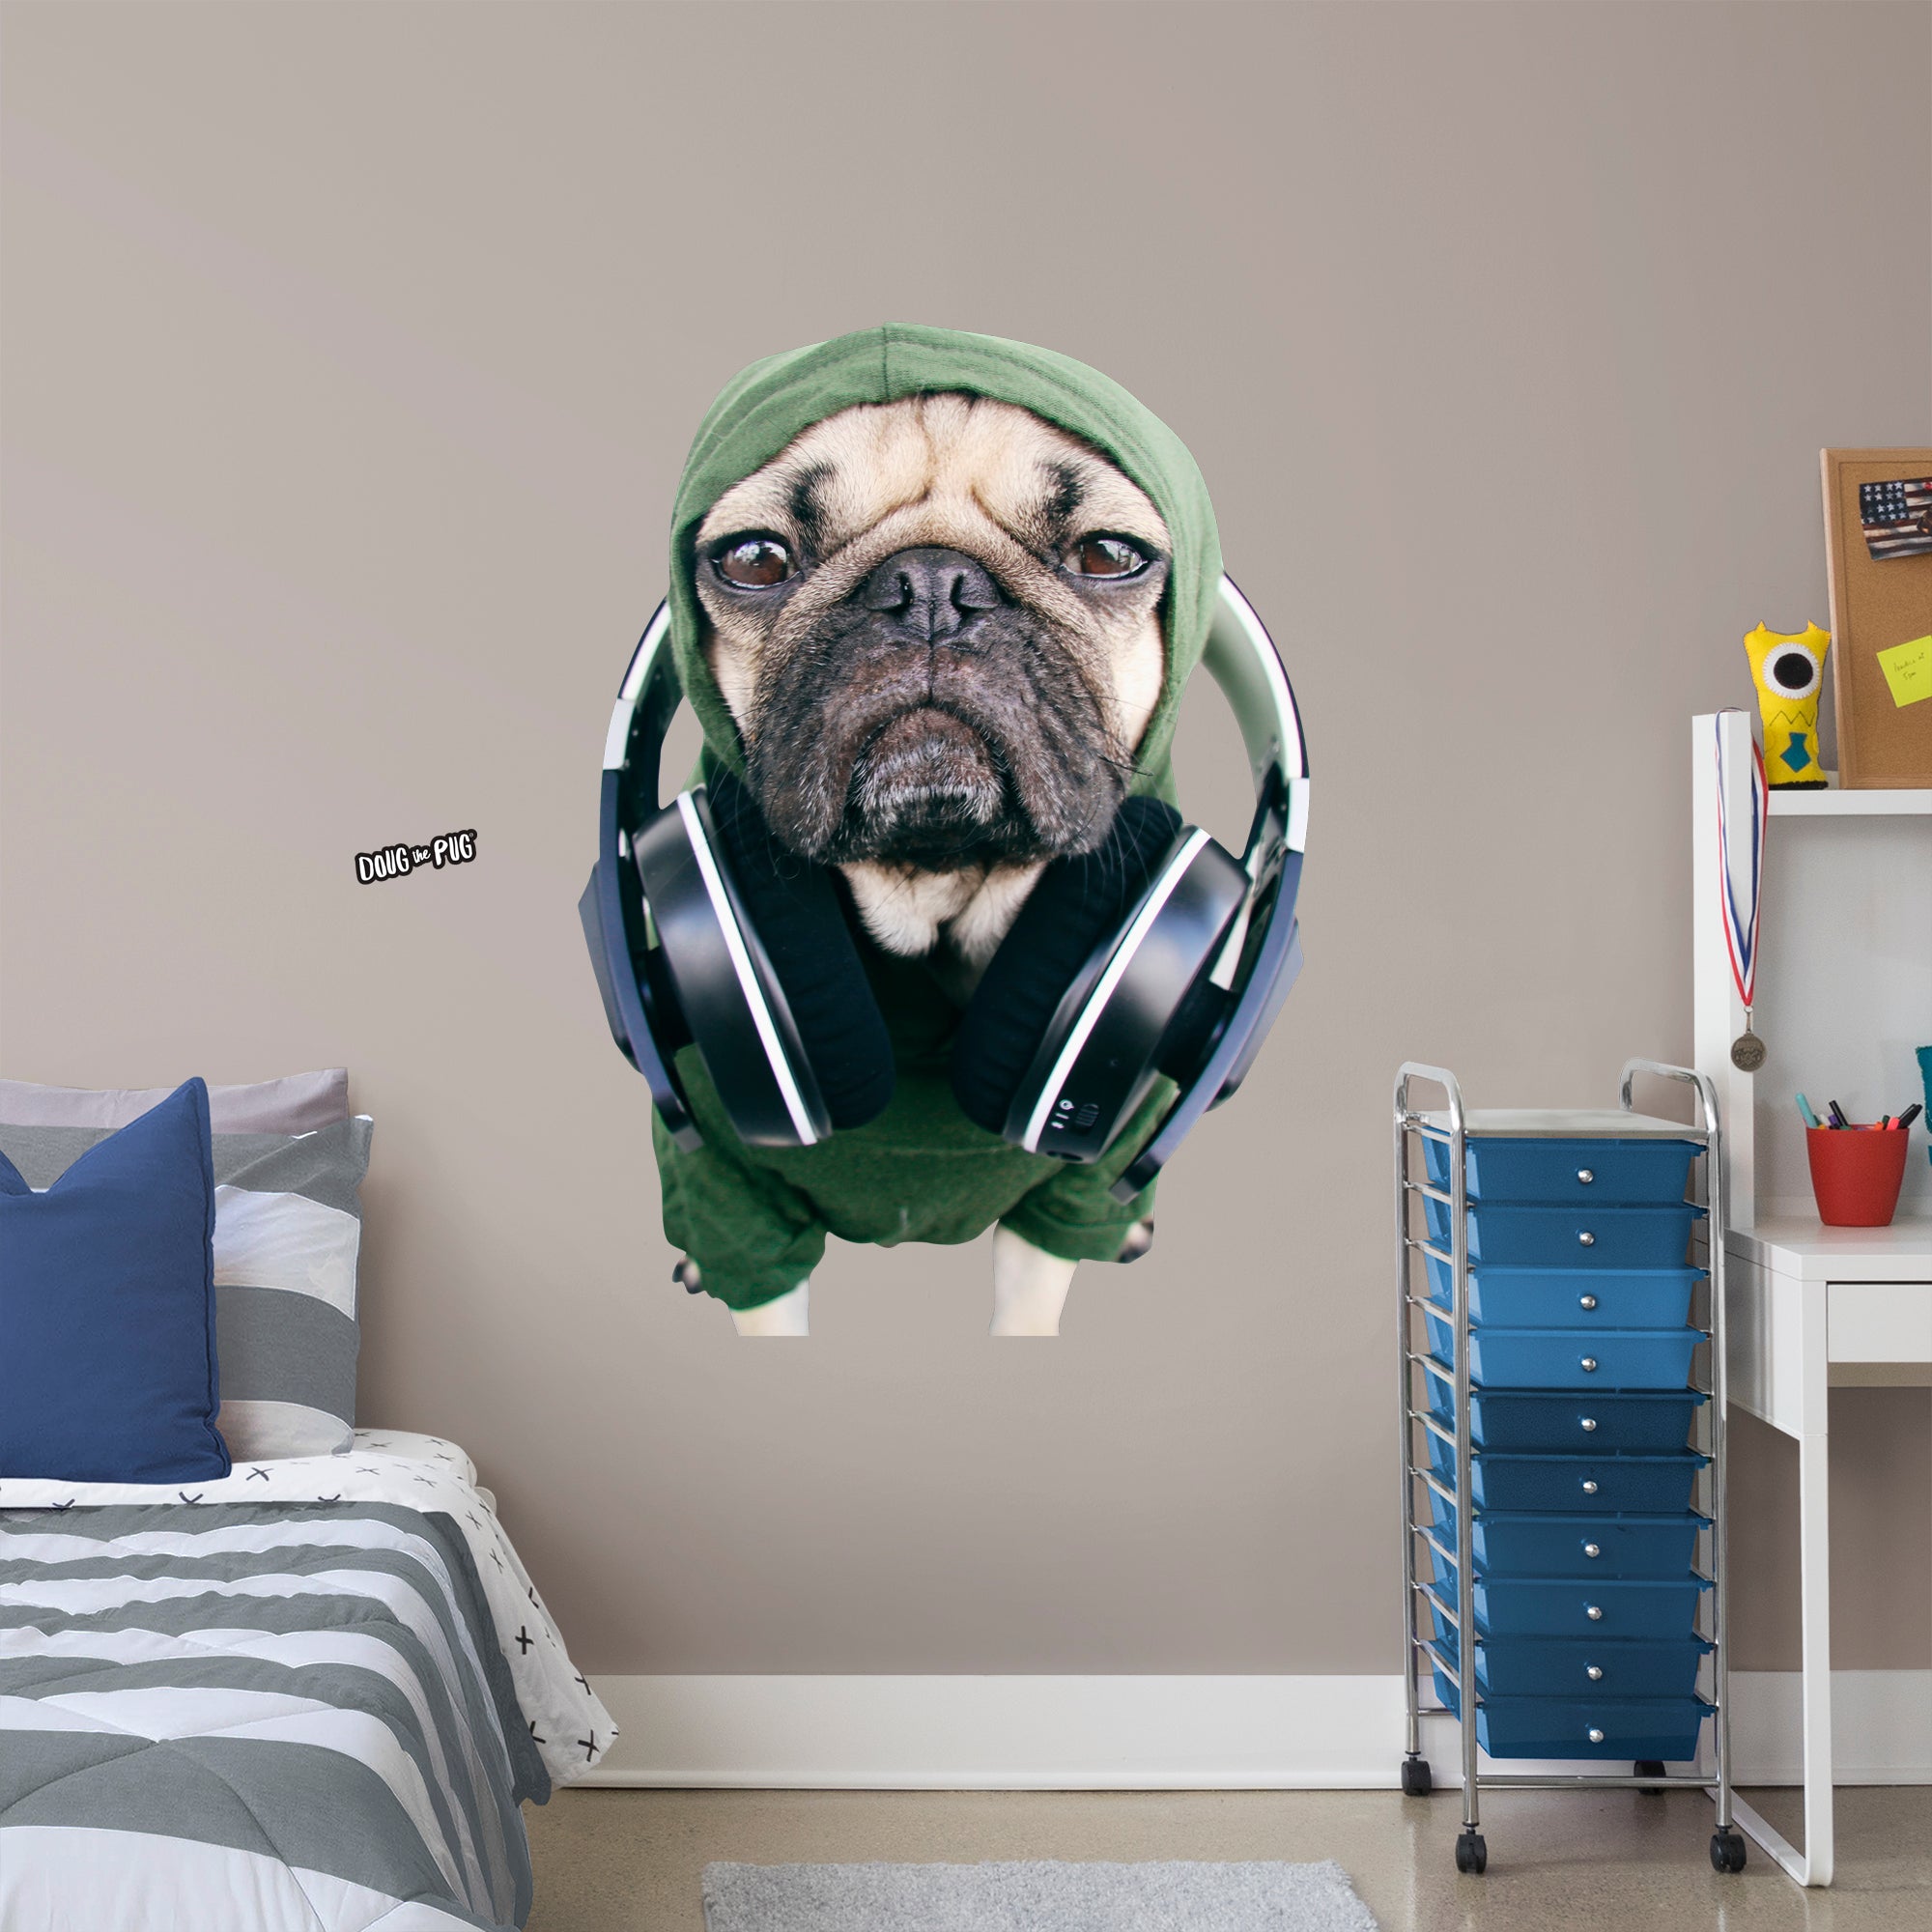 Doug the Pug: Pose 4 - Officially Licensed Removable Wall Decal Giant Character by Fathead | Vinyl